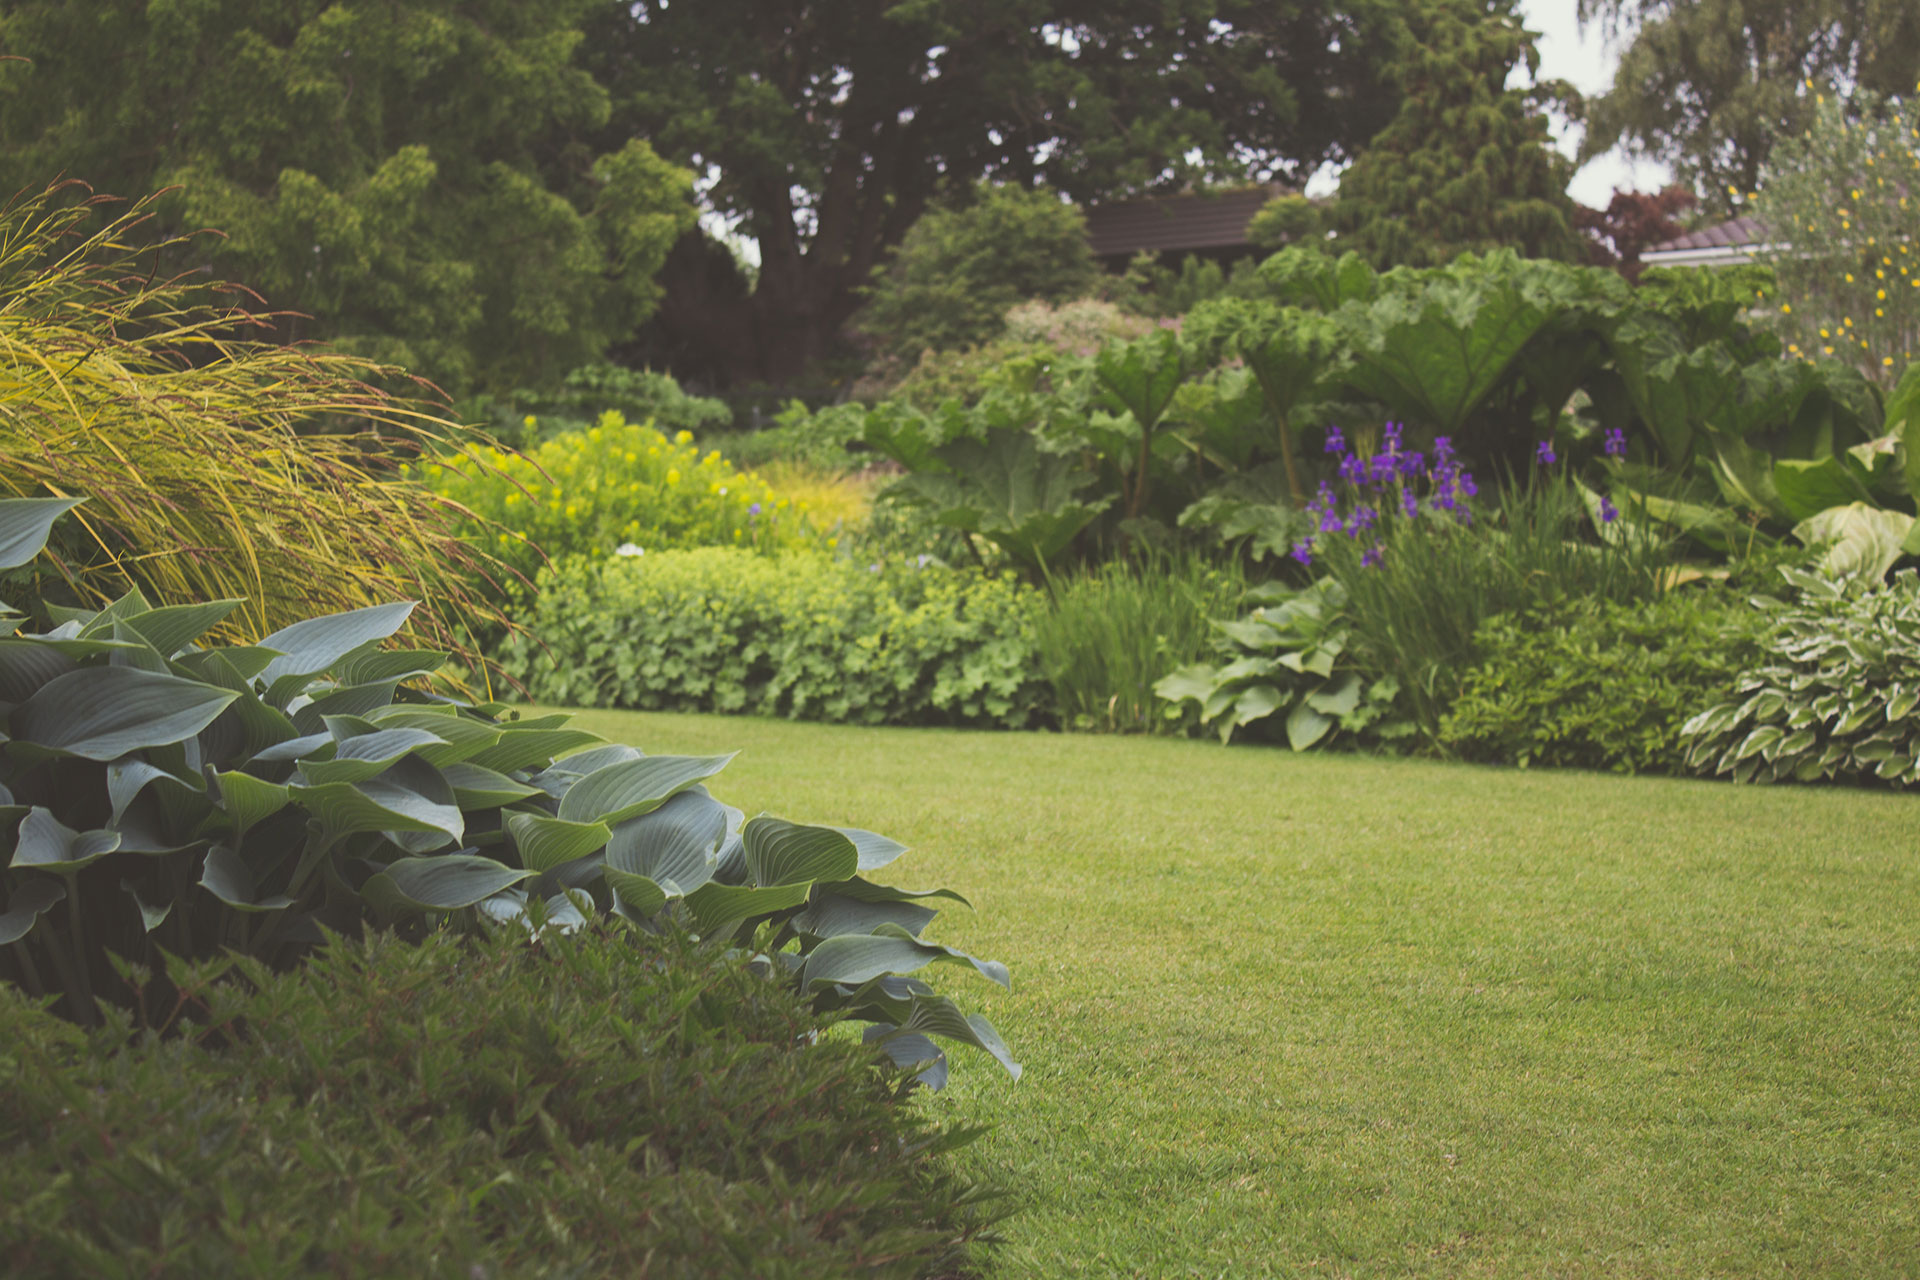 10 of the Best Poems about Gardens | Interesting Literature